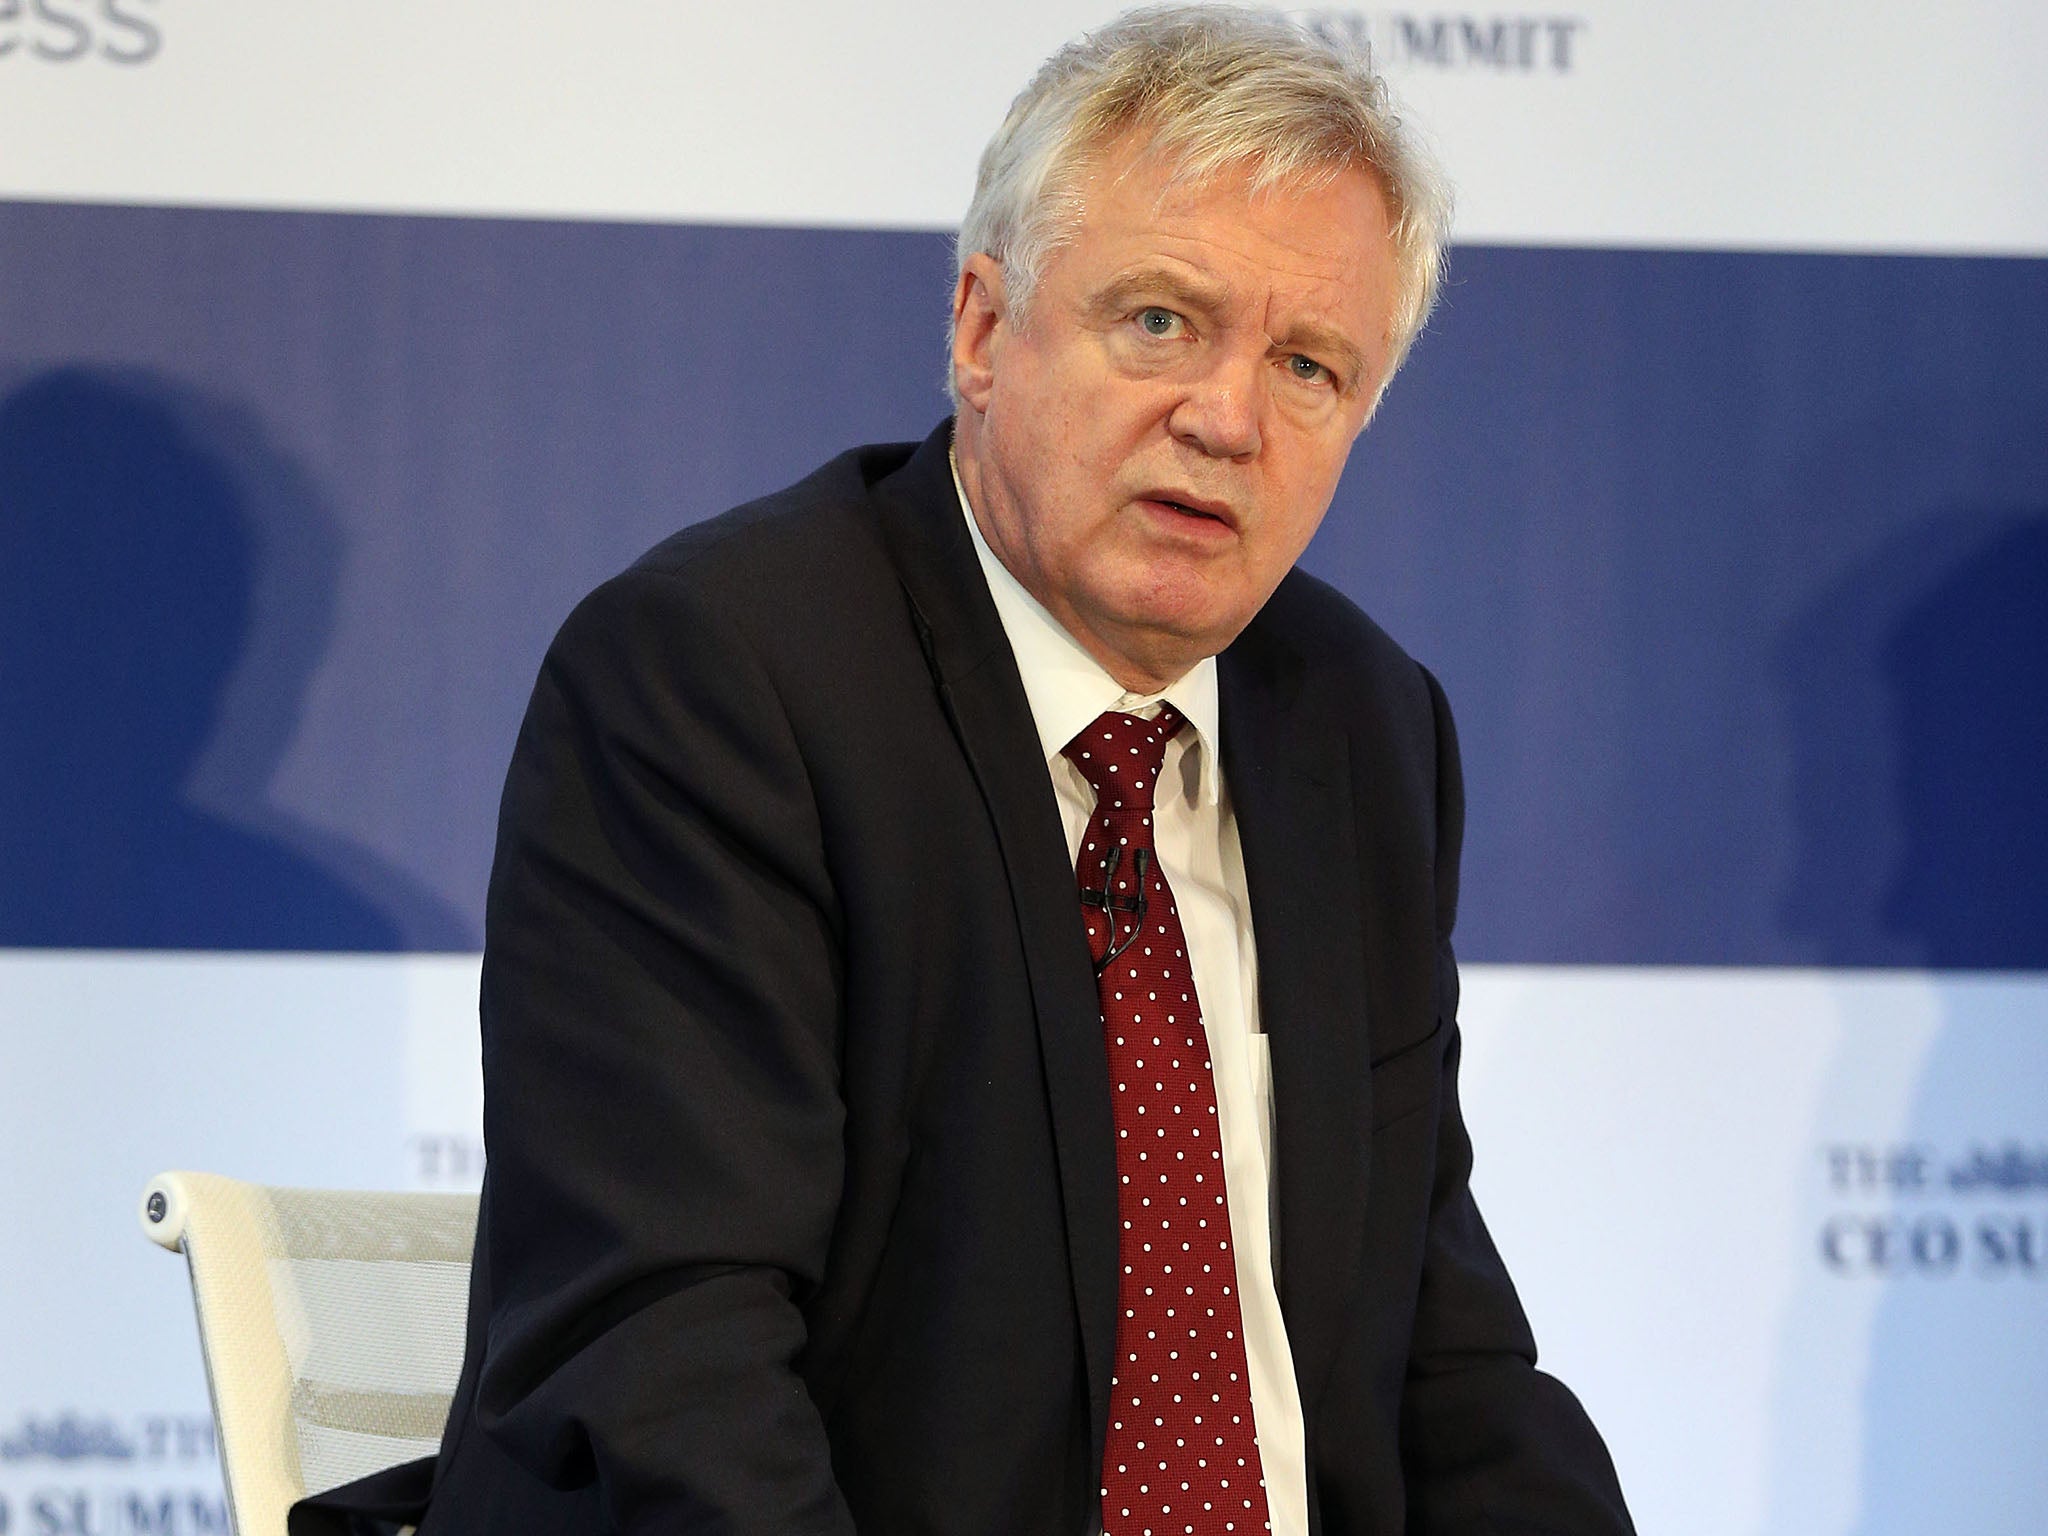 Brexit will not end in &apos;Mad Max dystopia&apos;, David Davis reassures